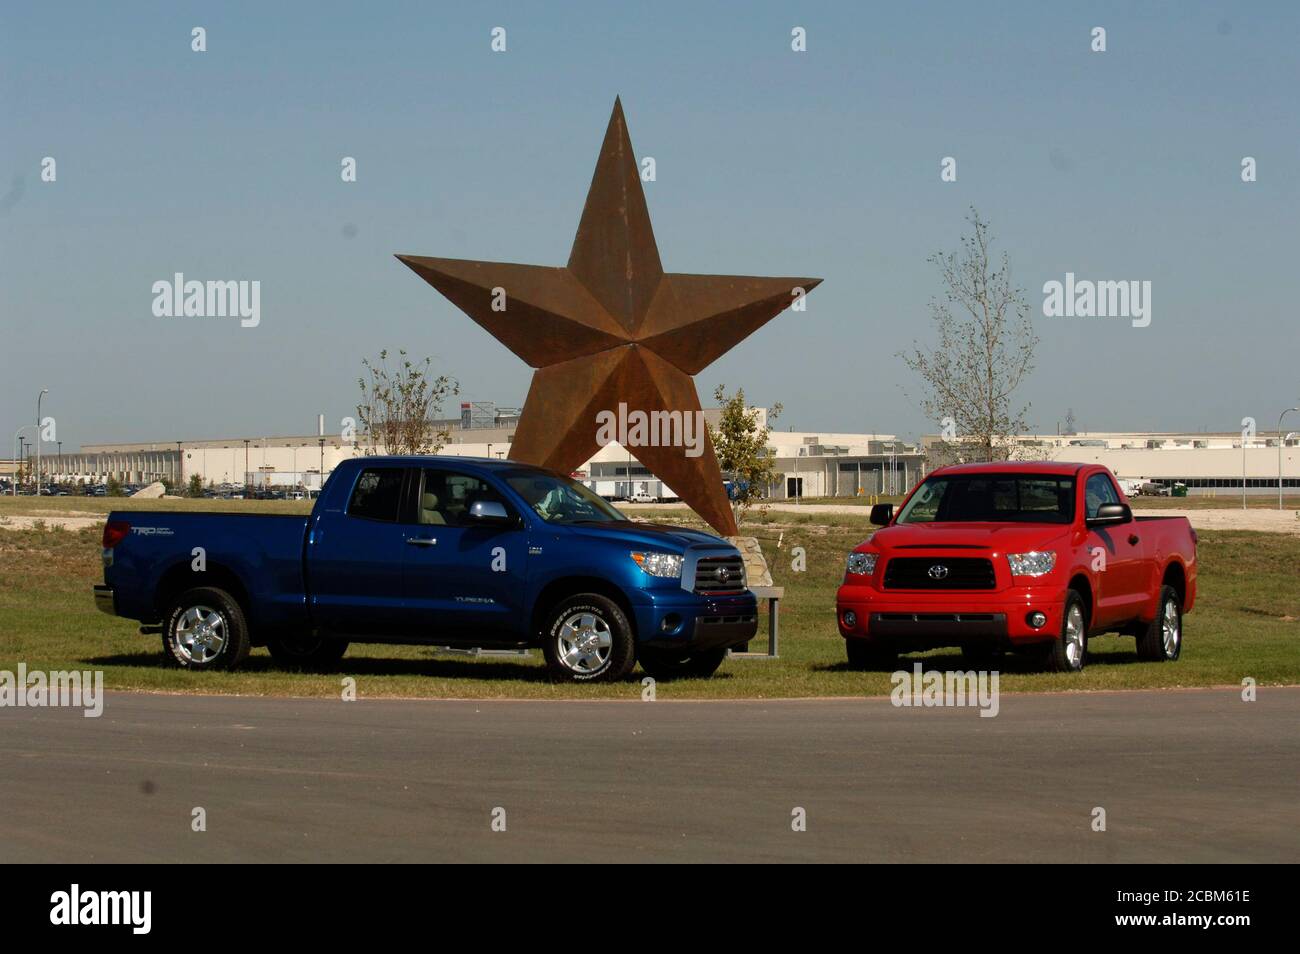 San Antonio, Texas November 17, 2006: The first two Toyota Tundra pickups off the assembly line at Toyota Motor Manufacturing's new south Texas assembly plant in Bexar Count sit near the visitor's center.  The $1.28-billion dollar facility employs about 1,800 workers. ©Bob Daemmrich Stock Photo